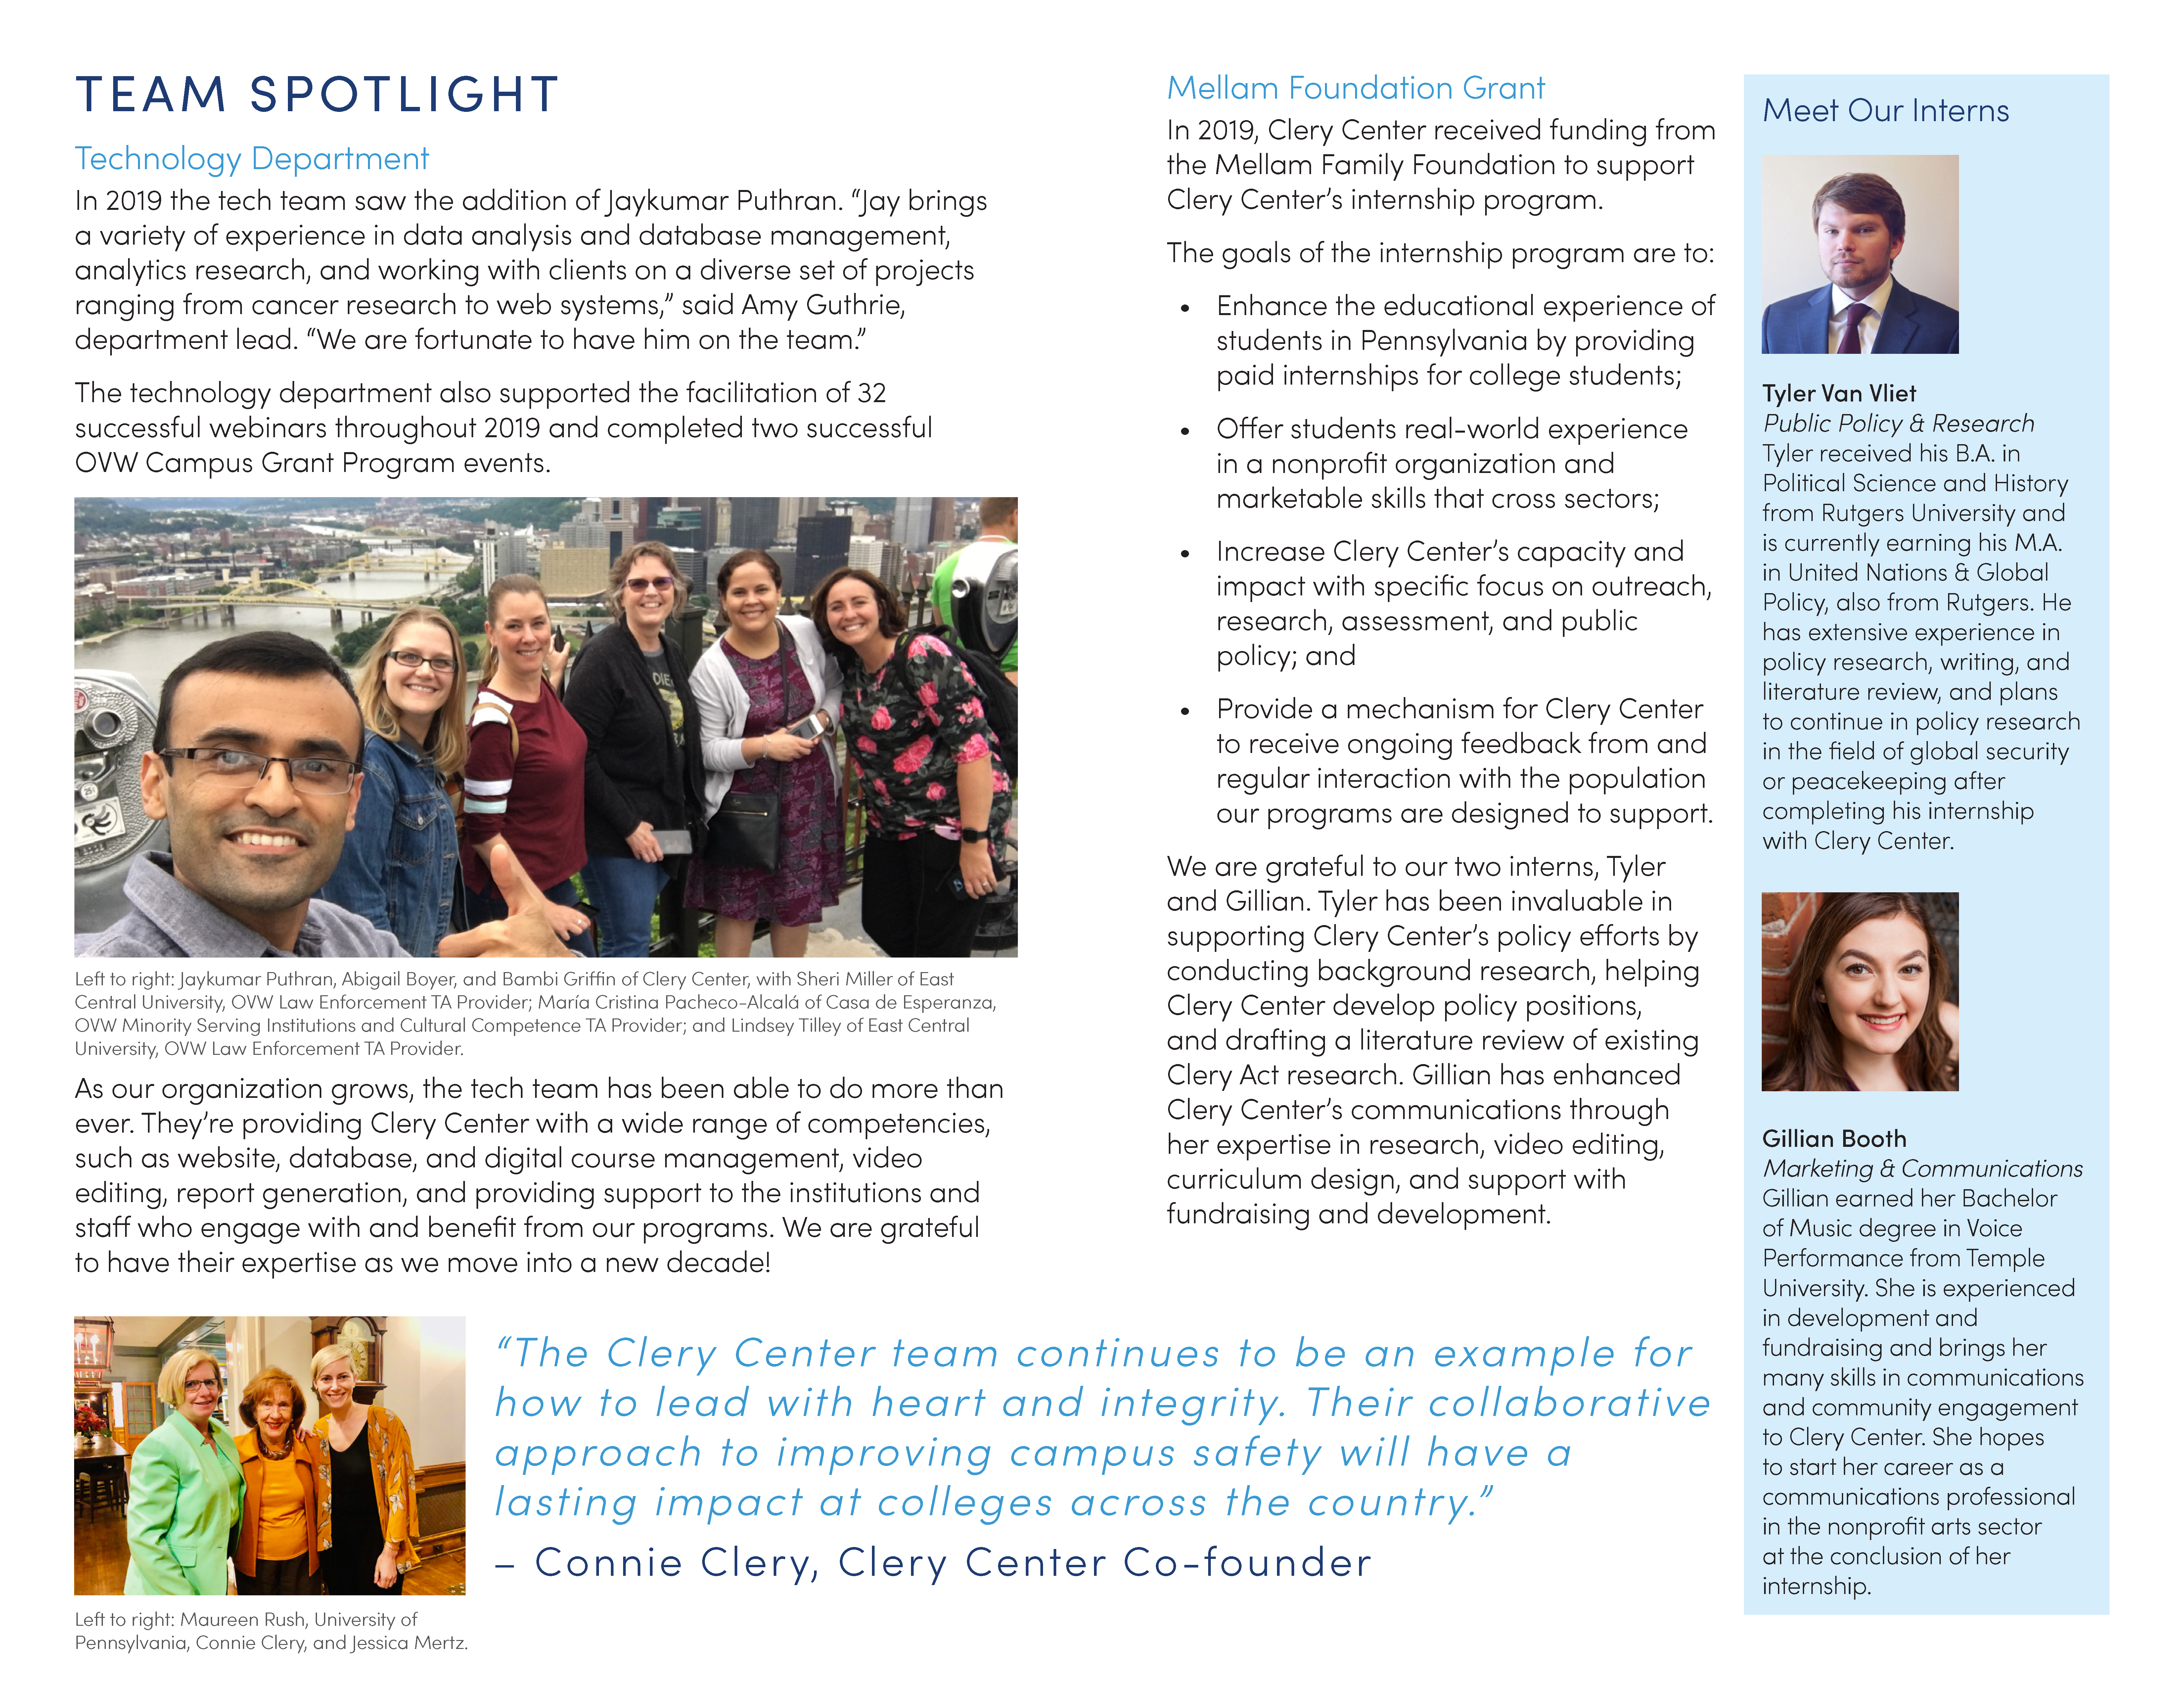 2019 Annual Report - page 4 image